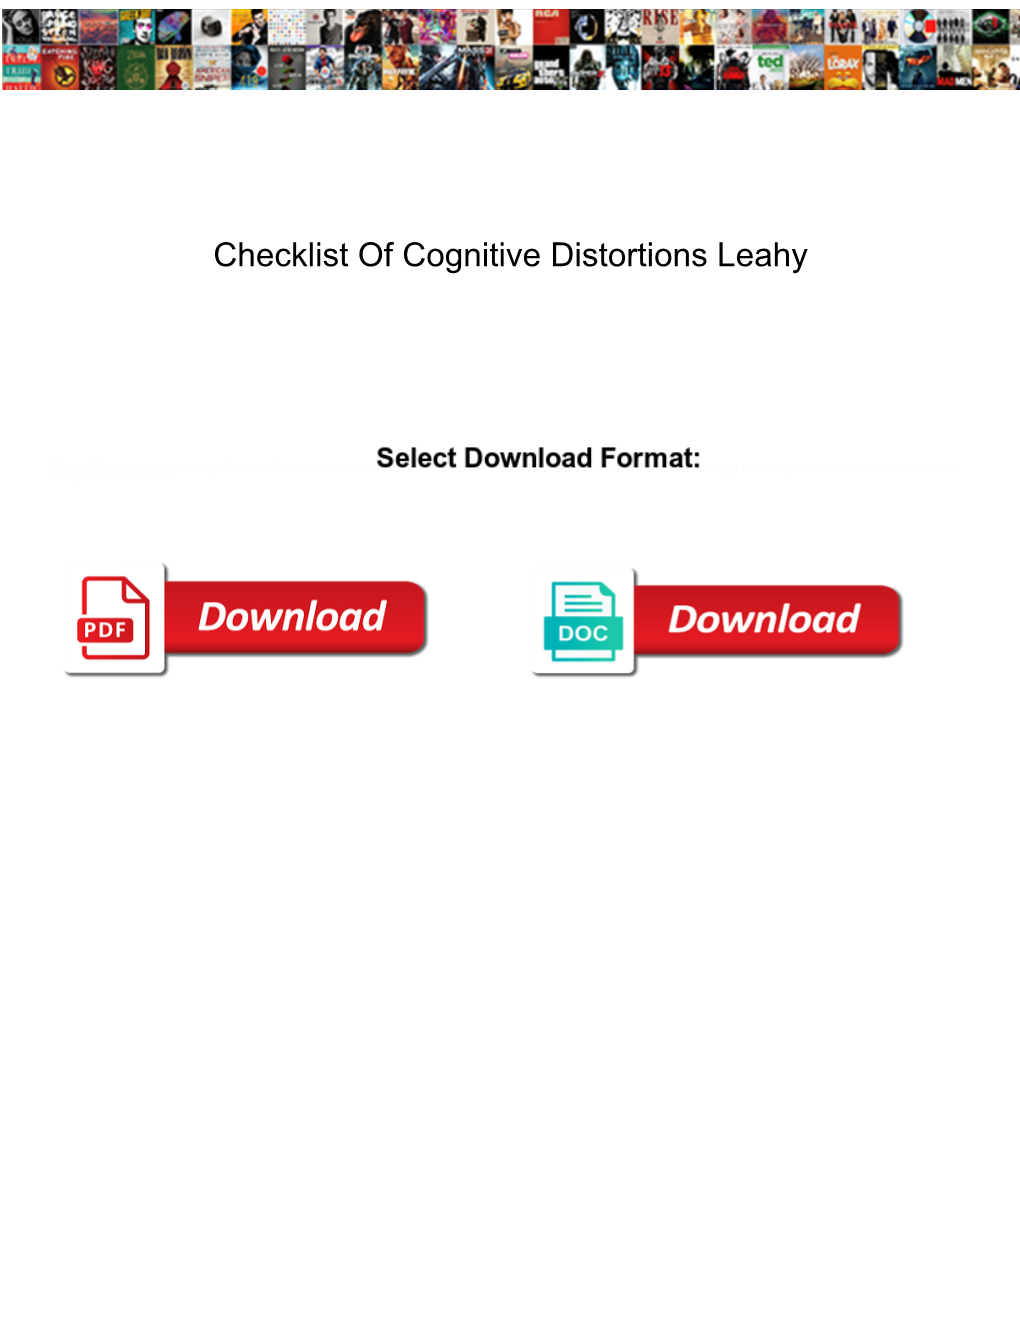 Checklist of Cognitive Distortions Leahy